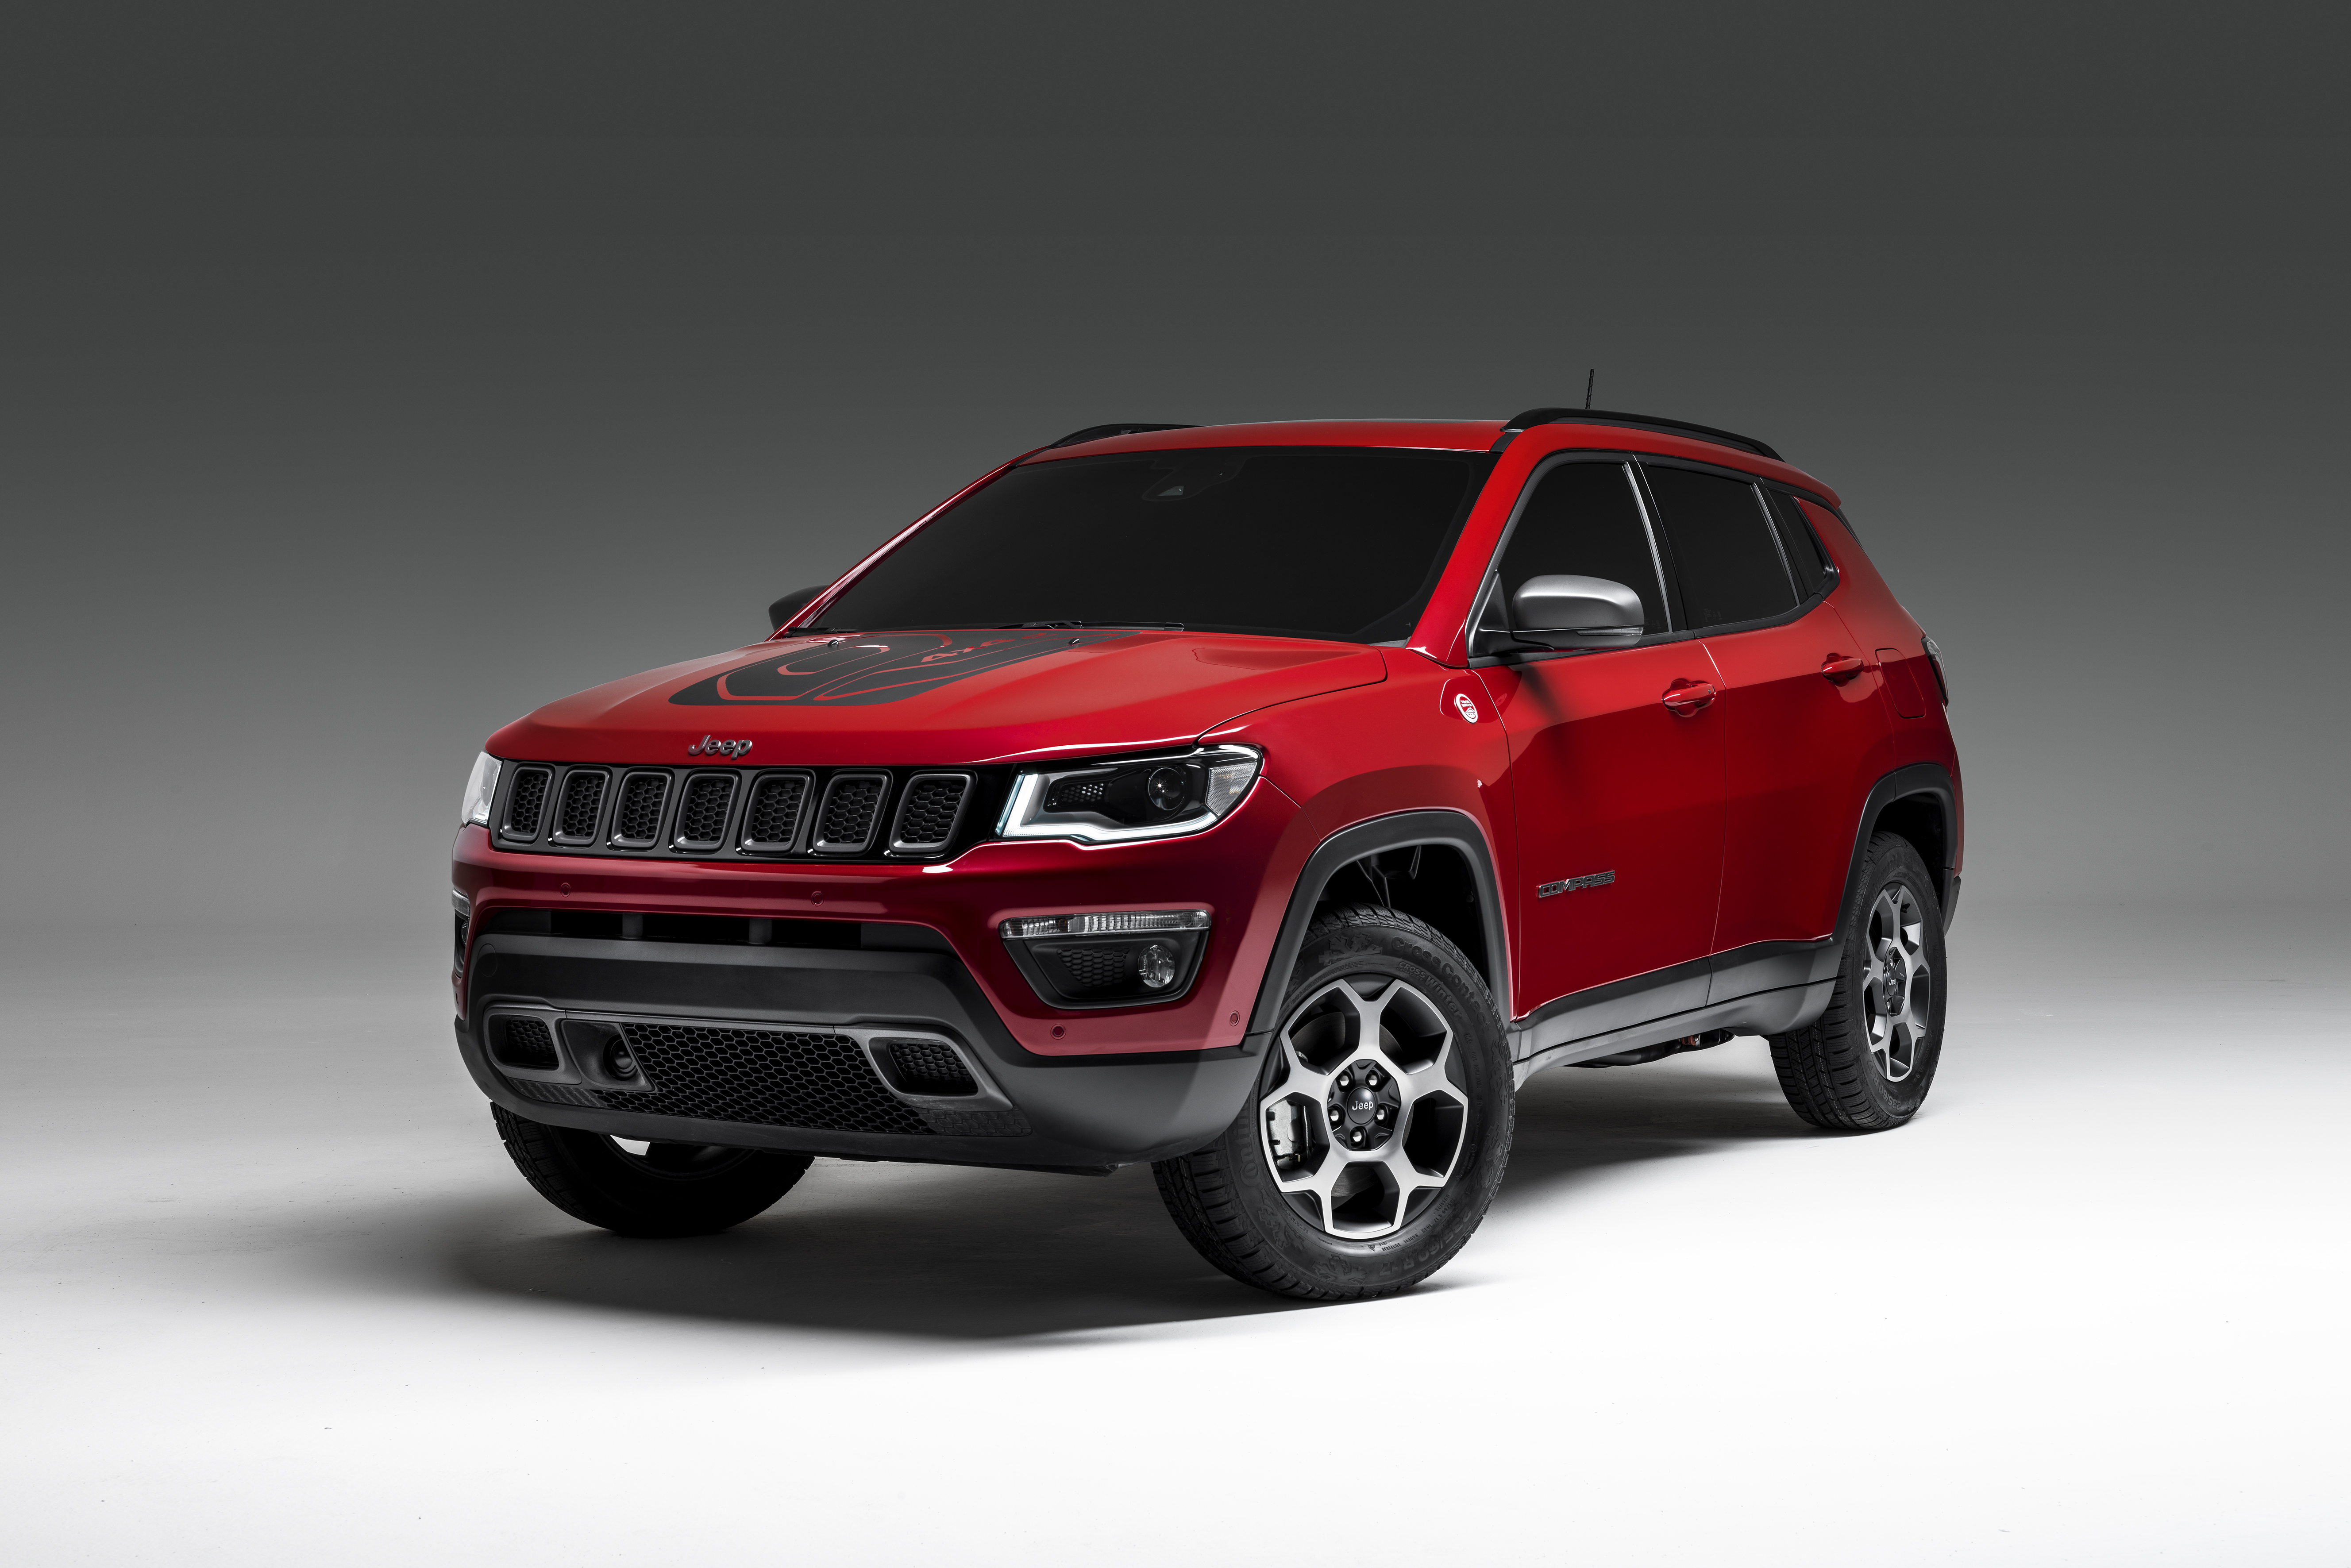 Jeep To Showcase Electrification at CES 2020